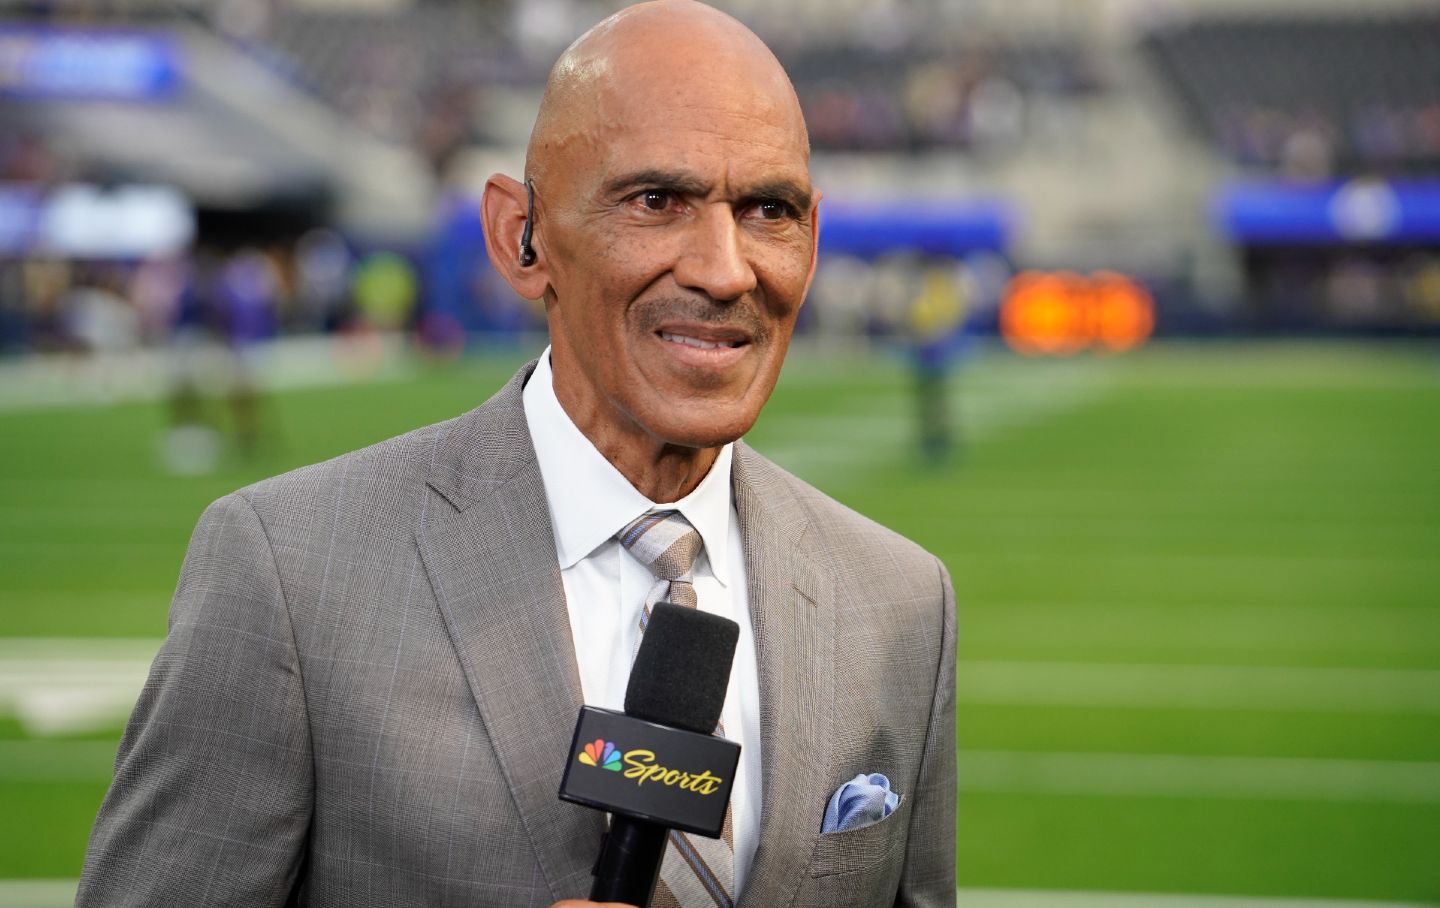 Tony Dungy Is a Right-Wing Zealot and the NFL and NBC Don't Care